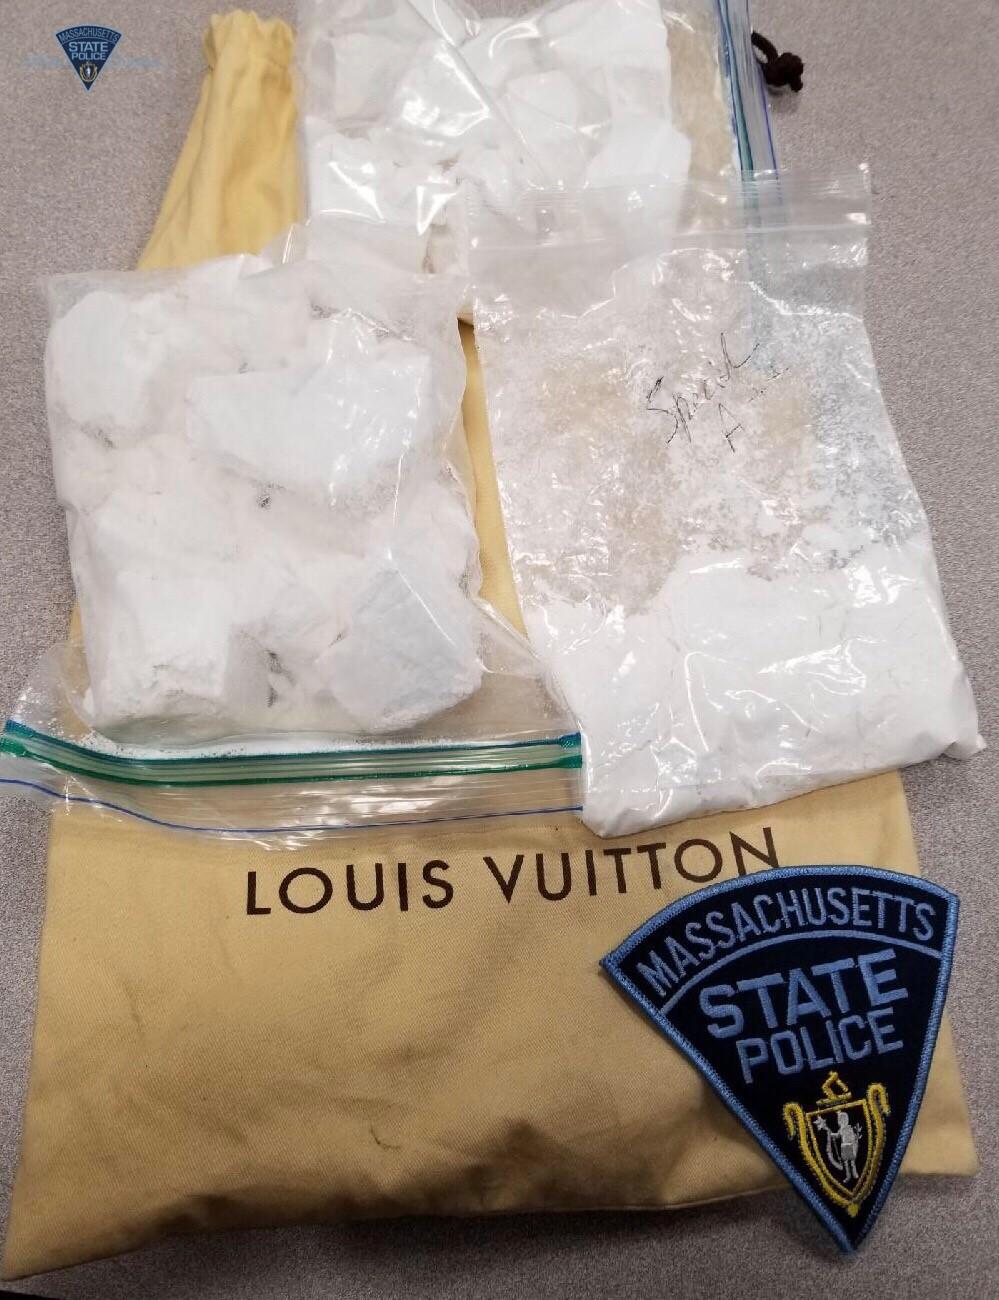 Cocaine seized during traffic stop in Sturbridge